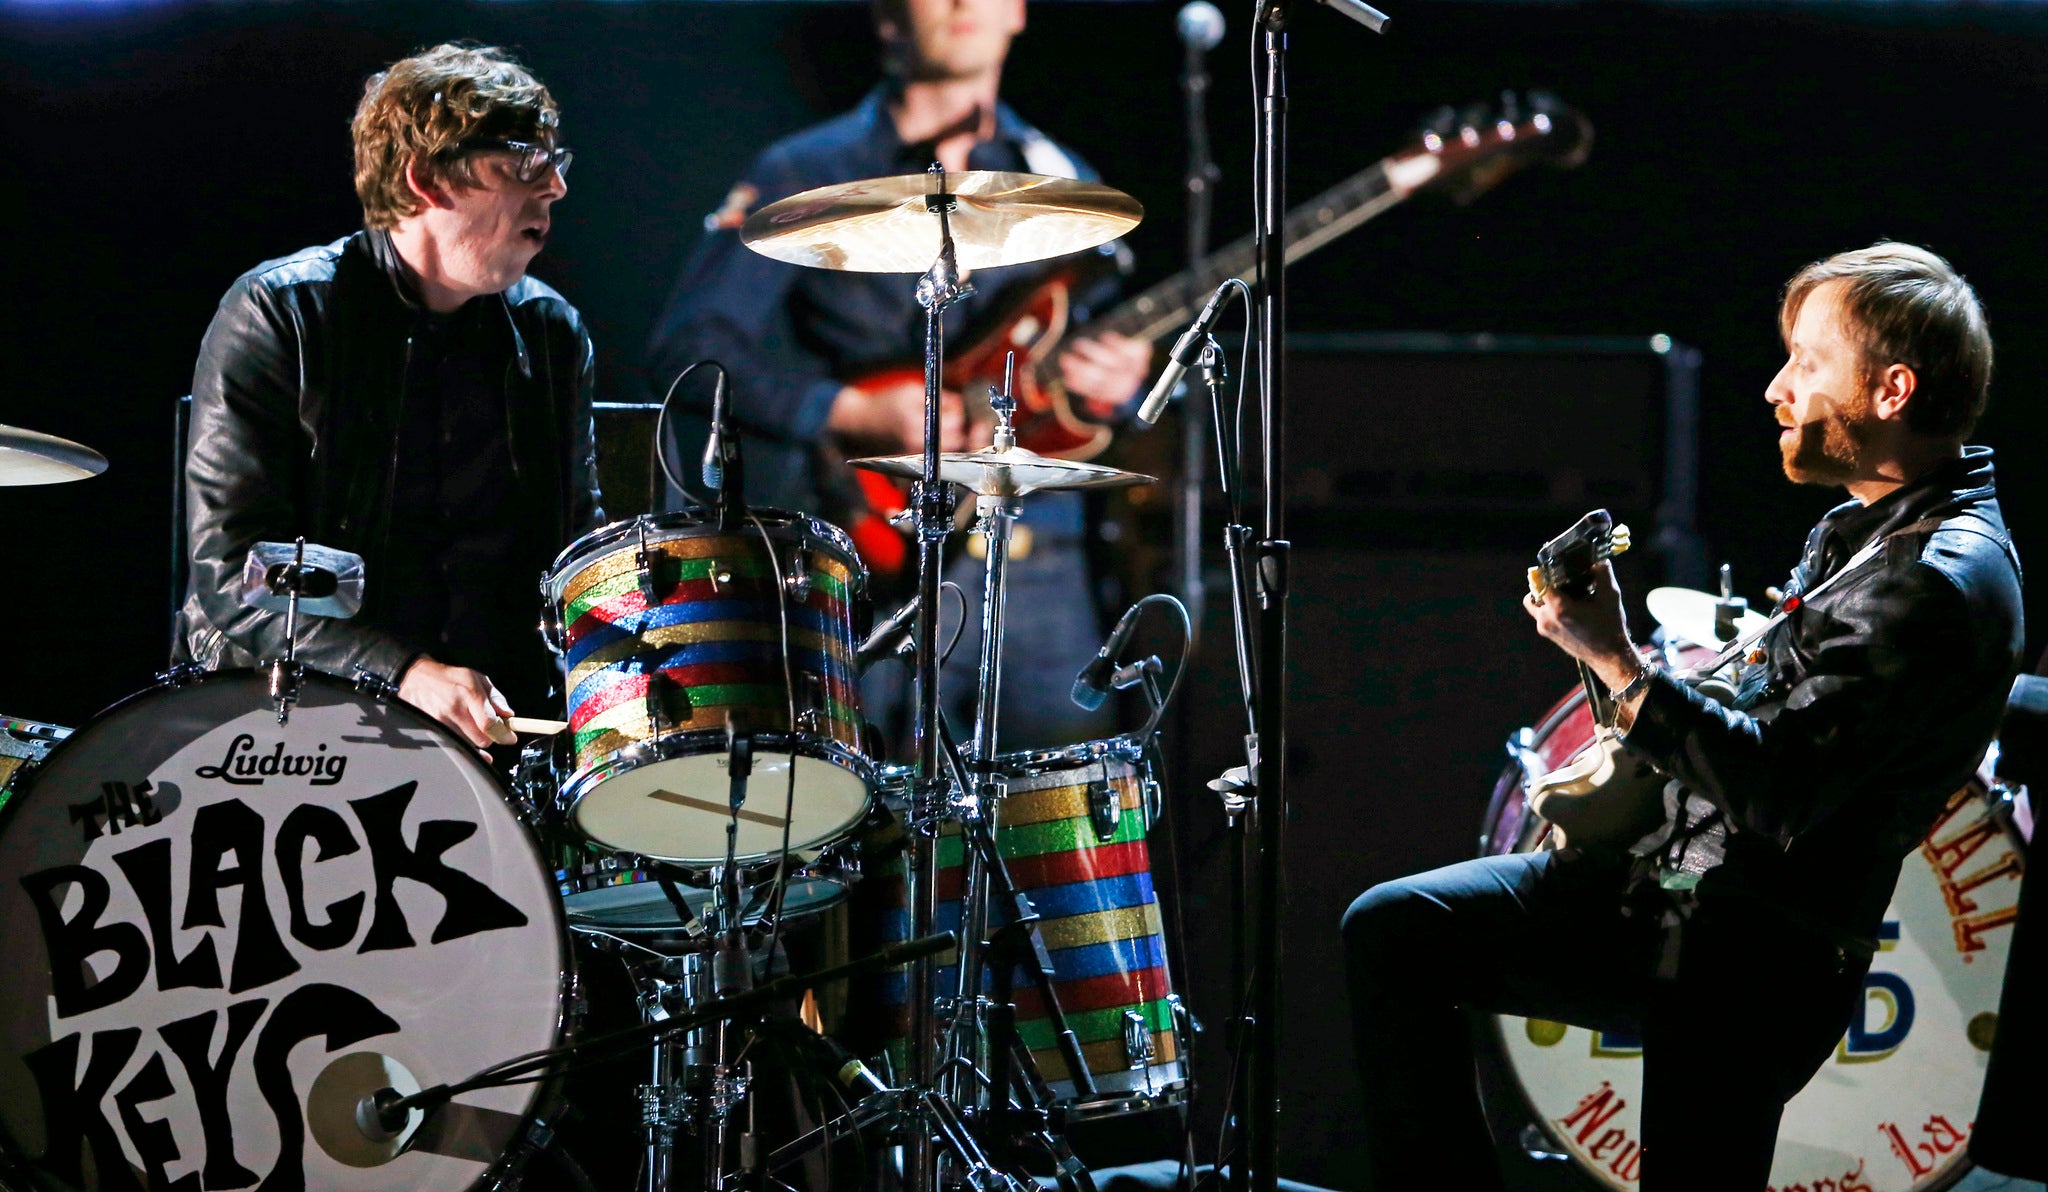 The Black Keys have announced UK tour dates for 2015